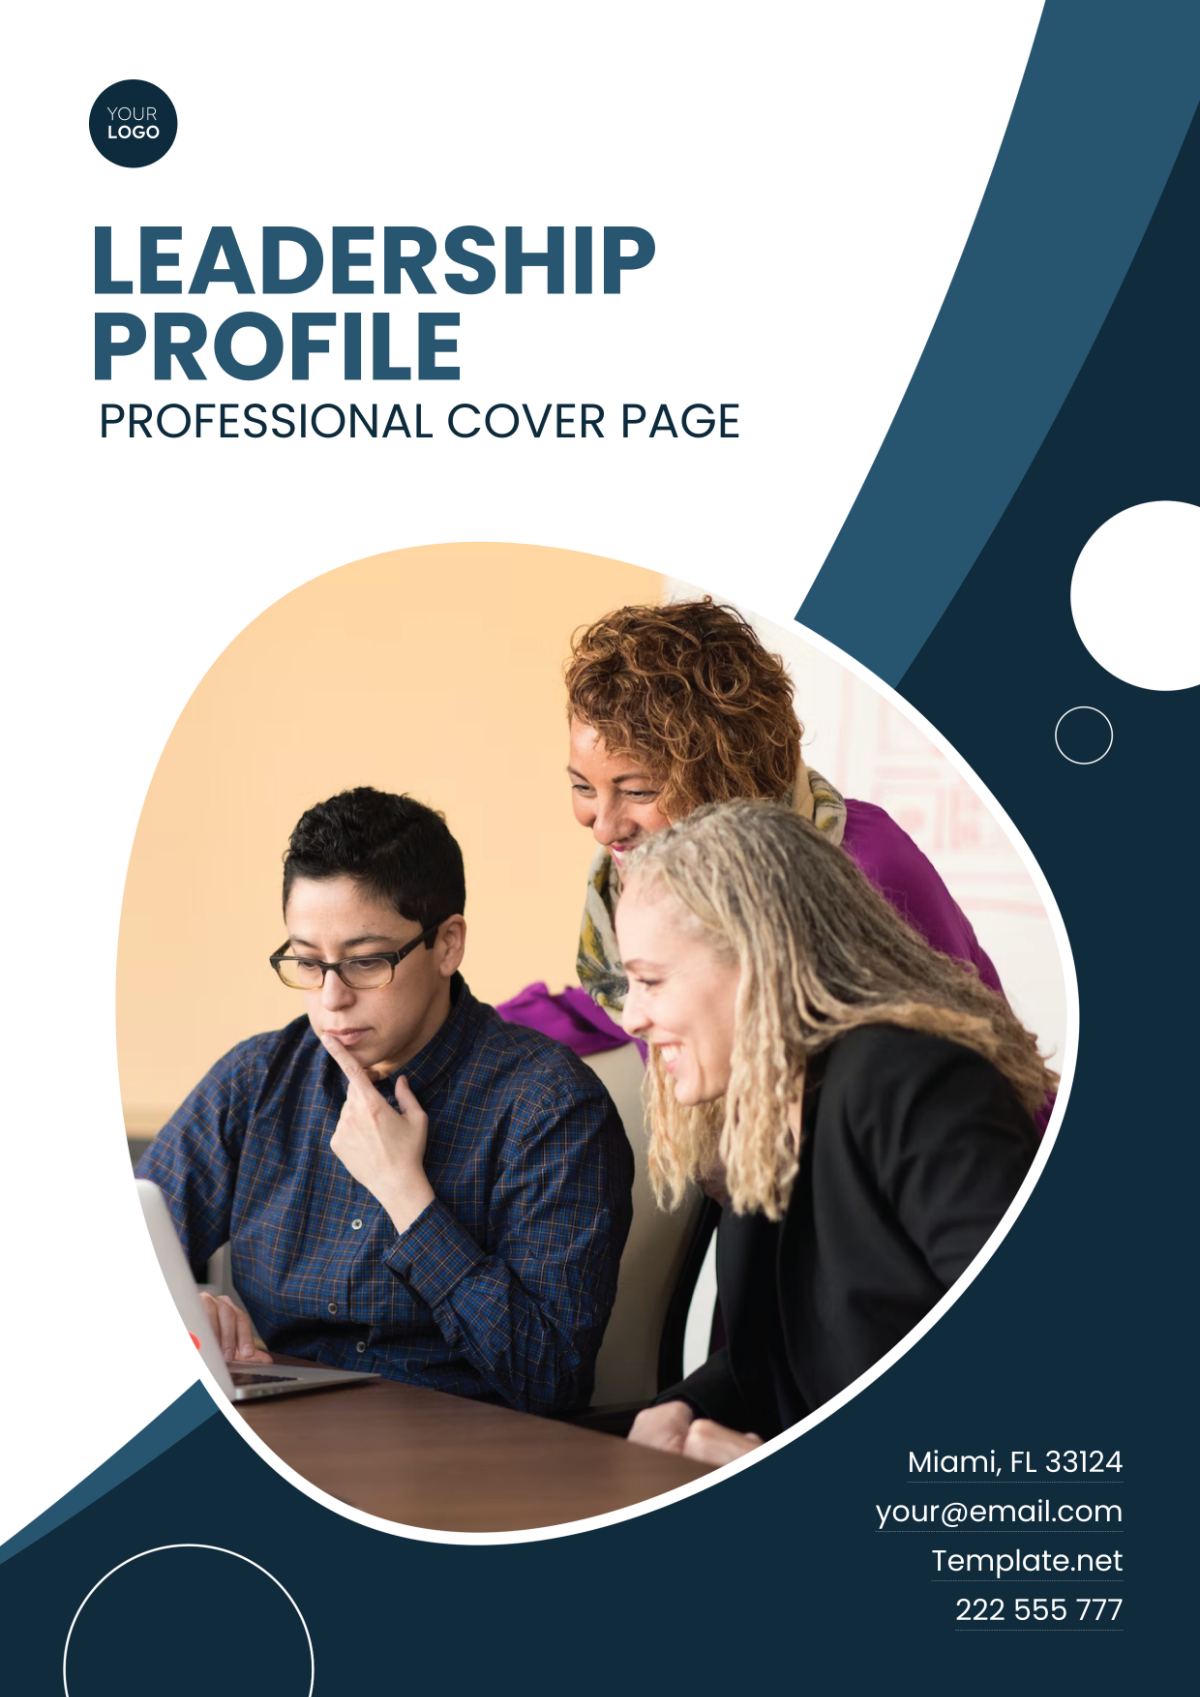 Leadership Profile Professional Cover Page